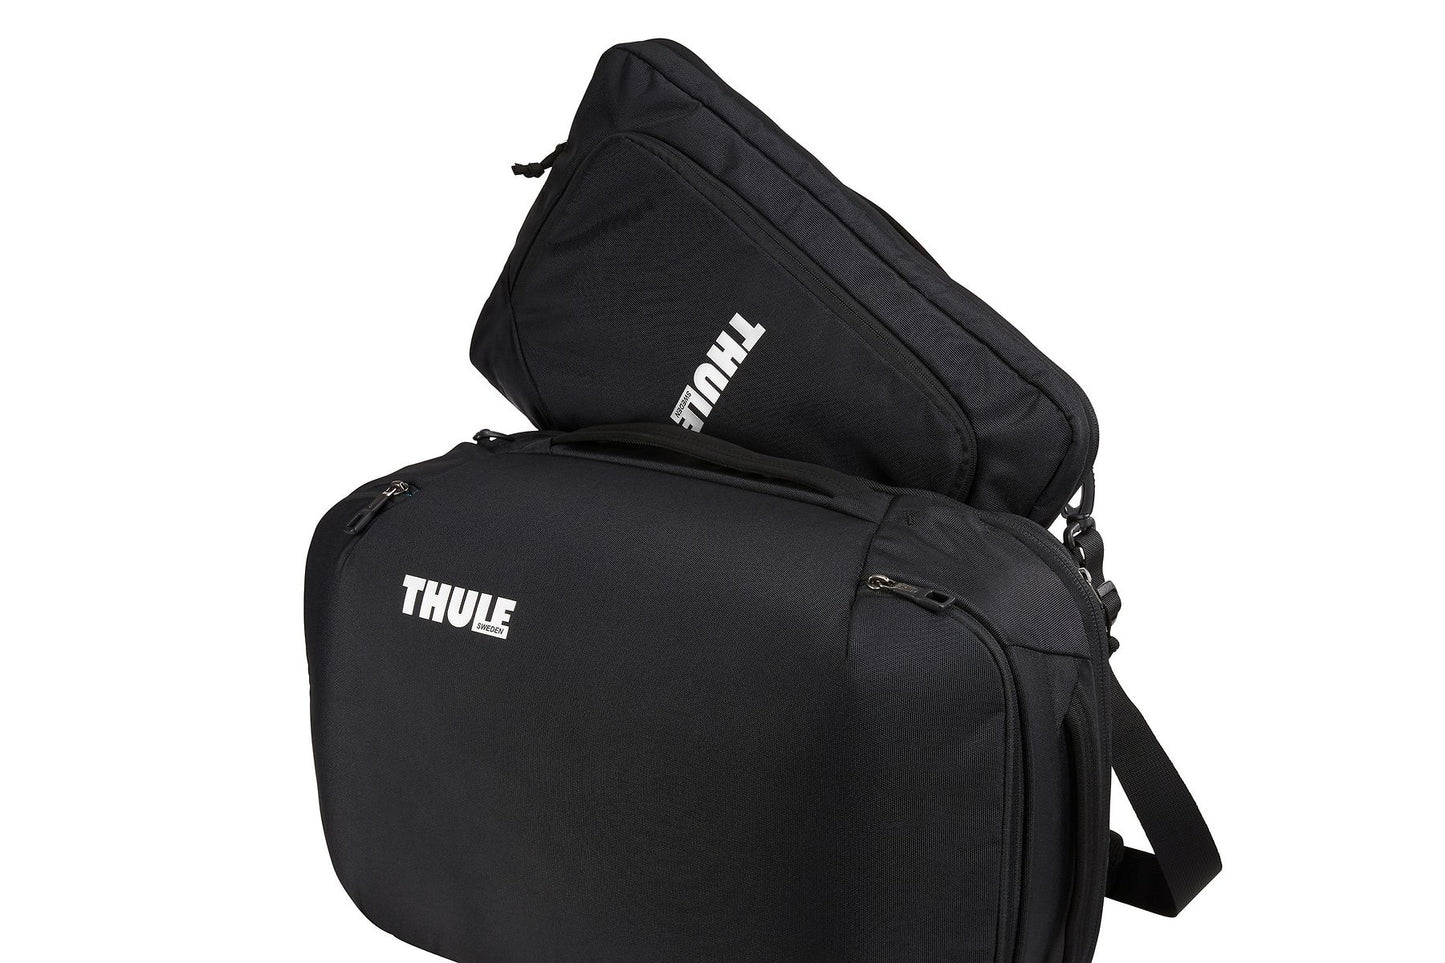 THULE Subterra 40L convertible carry-on backpack/duffel